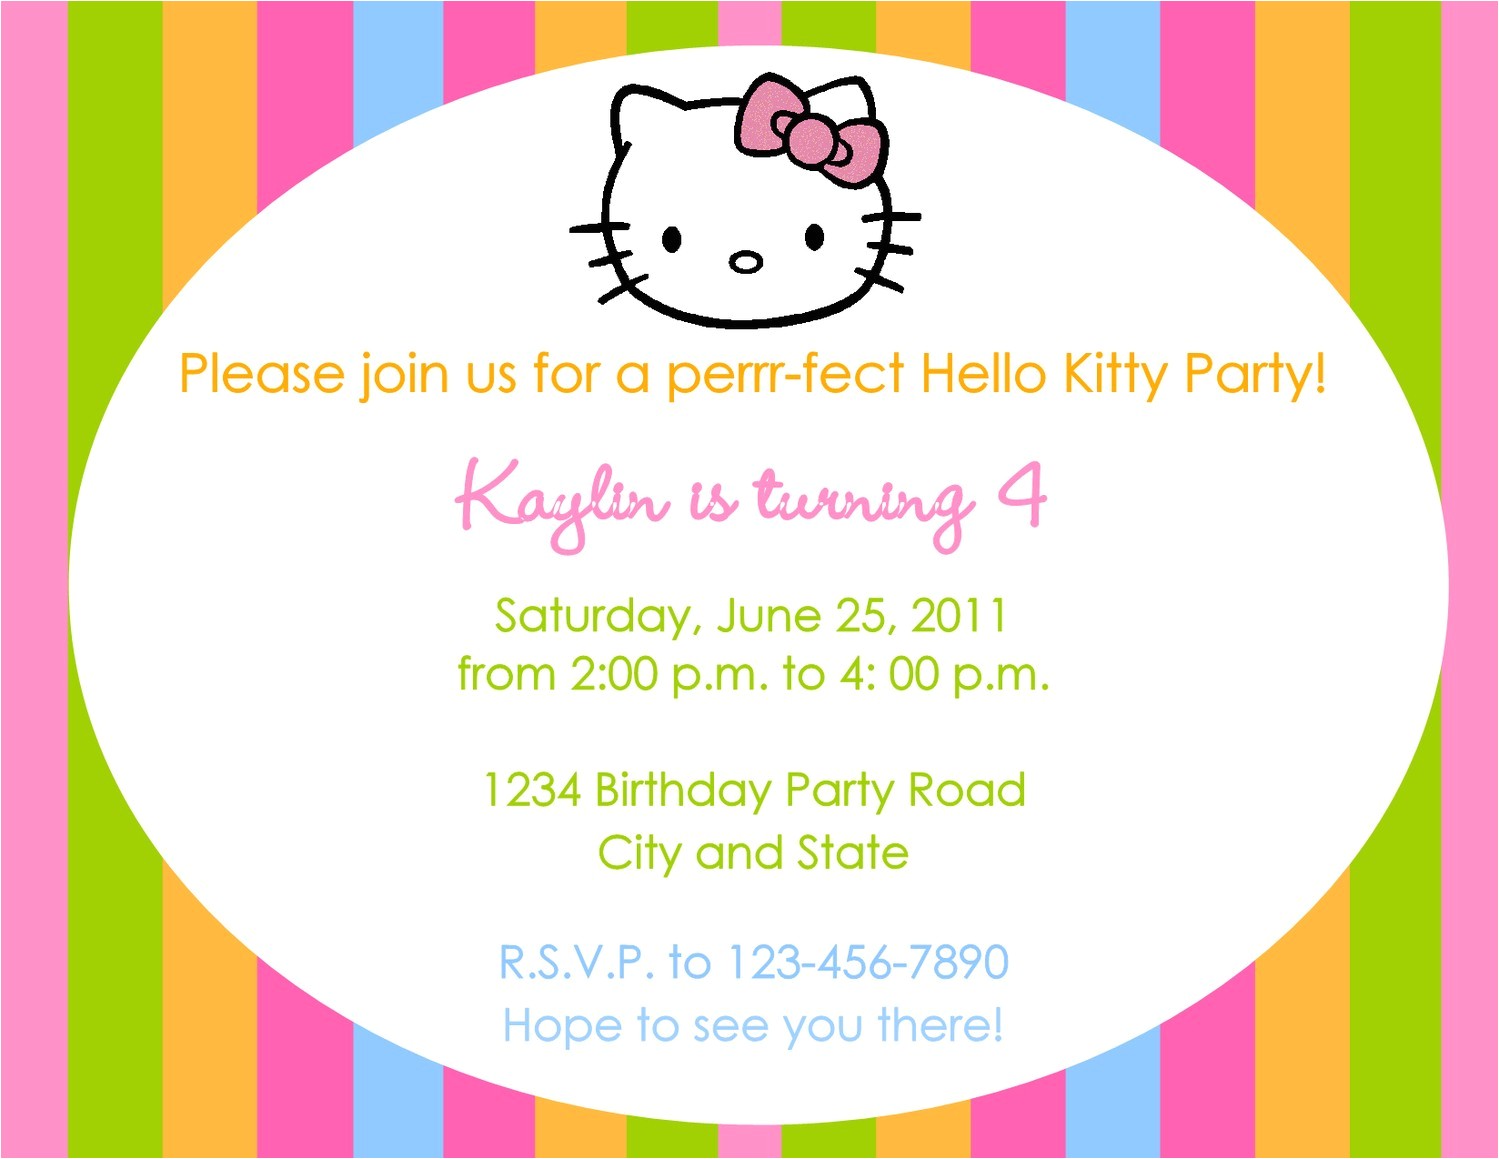 Text for An Invitation for A Birthday Party Birthday Invitation Text Template